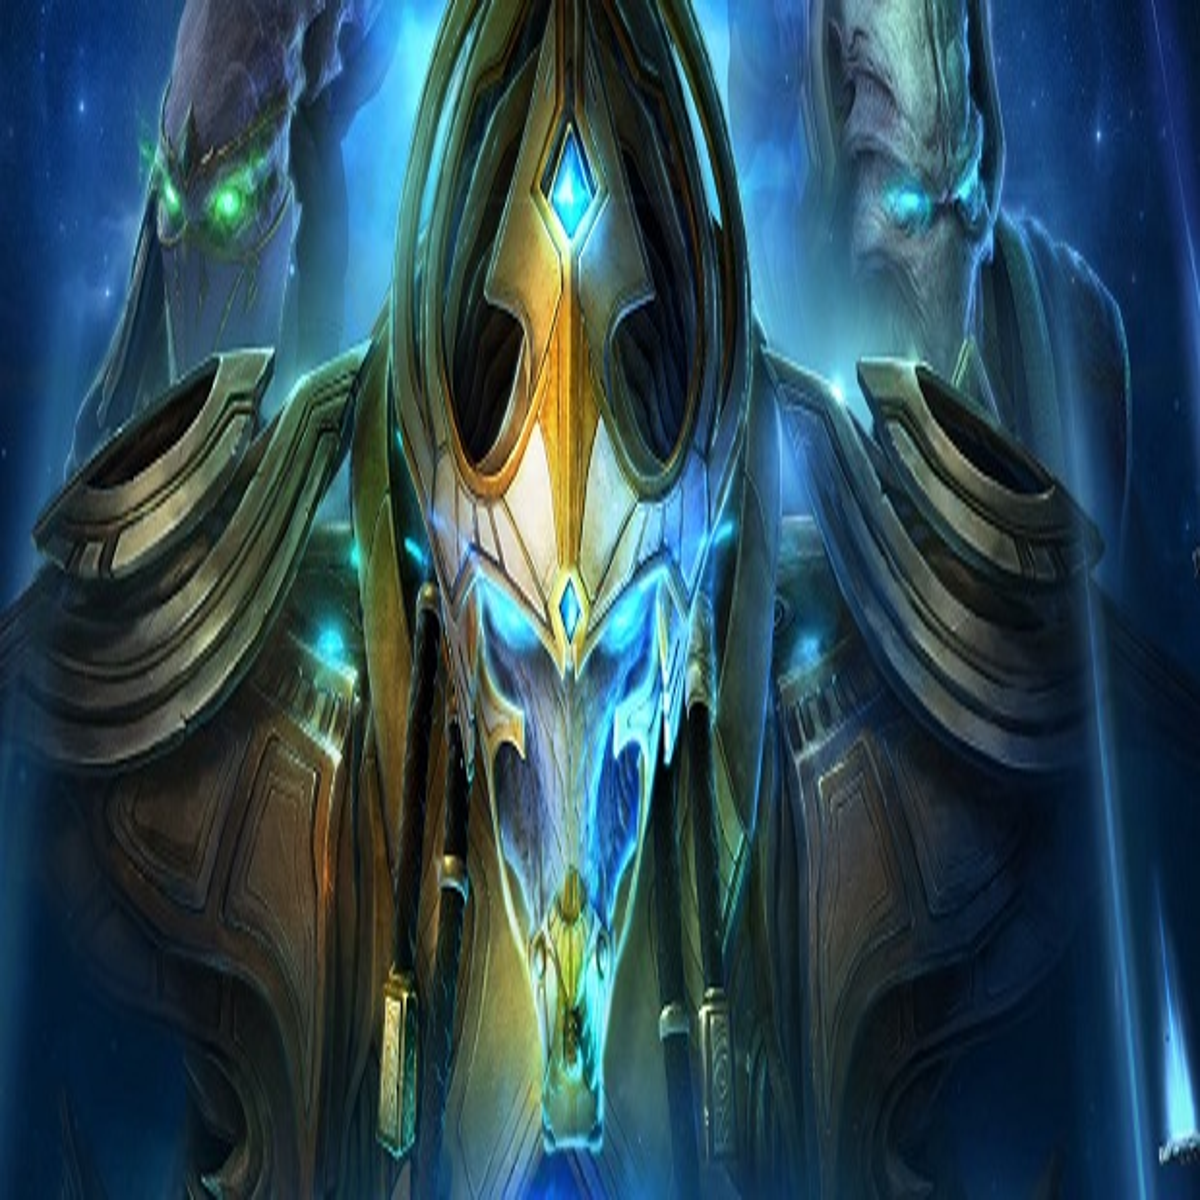 starcraft 2 legacy of the void artanis